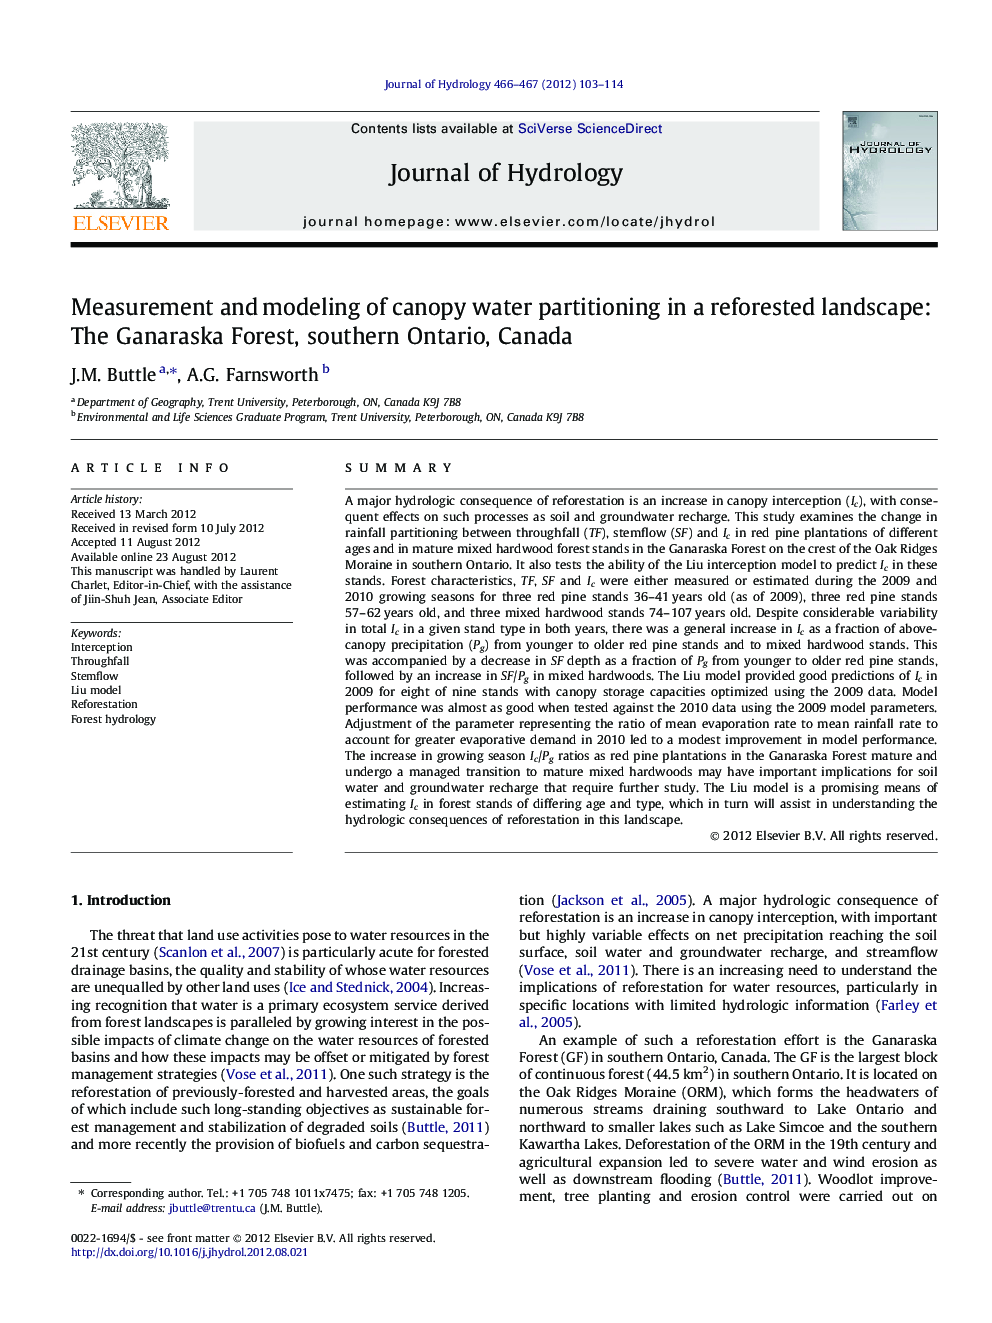 Measurement and modeling of canopy water partitioning in a reforested landscape: The Ganaraska Forest, southern Ontario, Canada